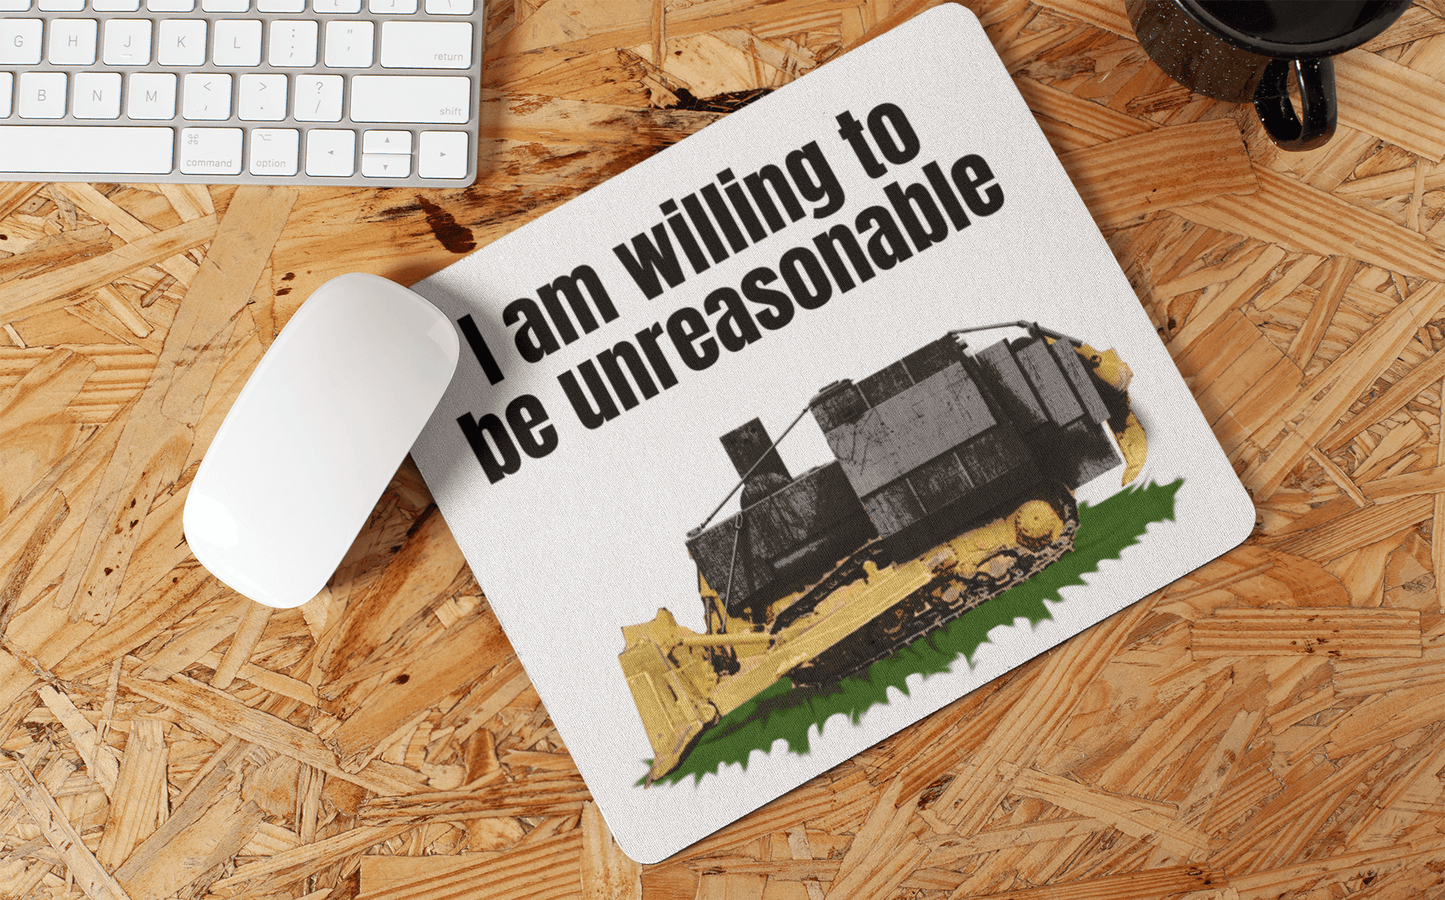 I am willing to be unreasonable  - Mouse pad